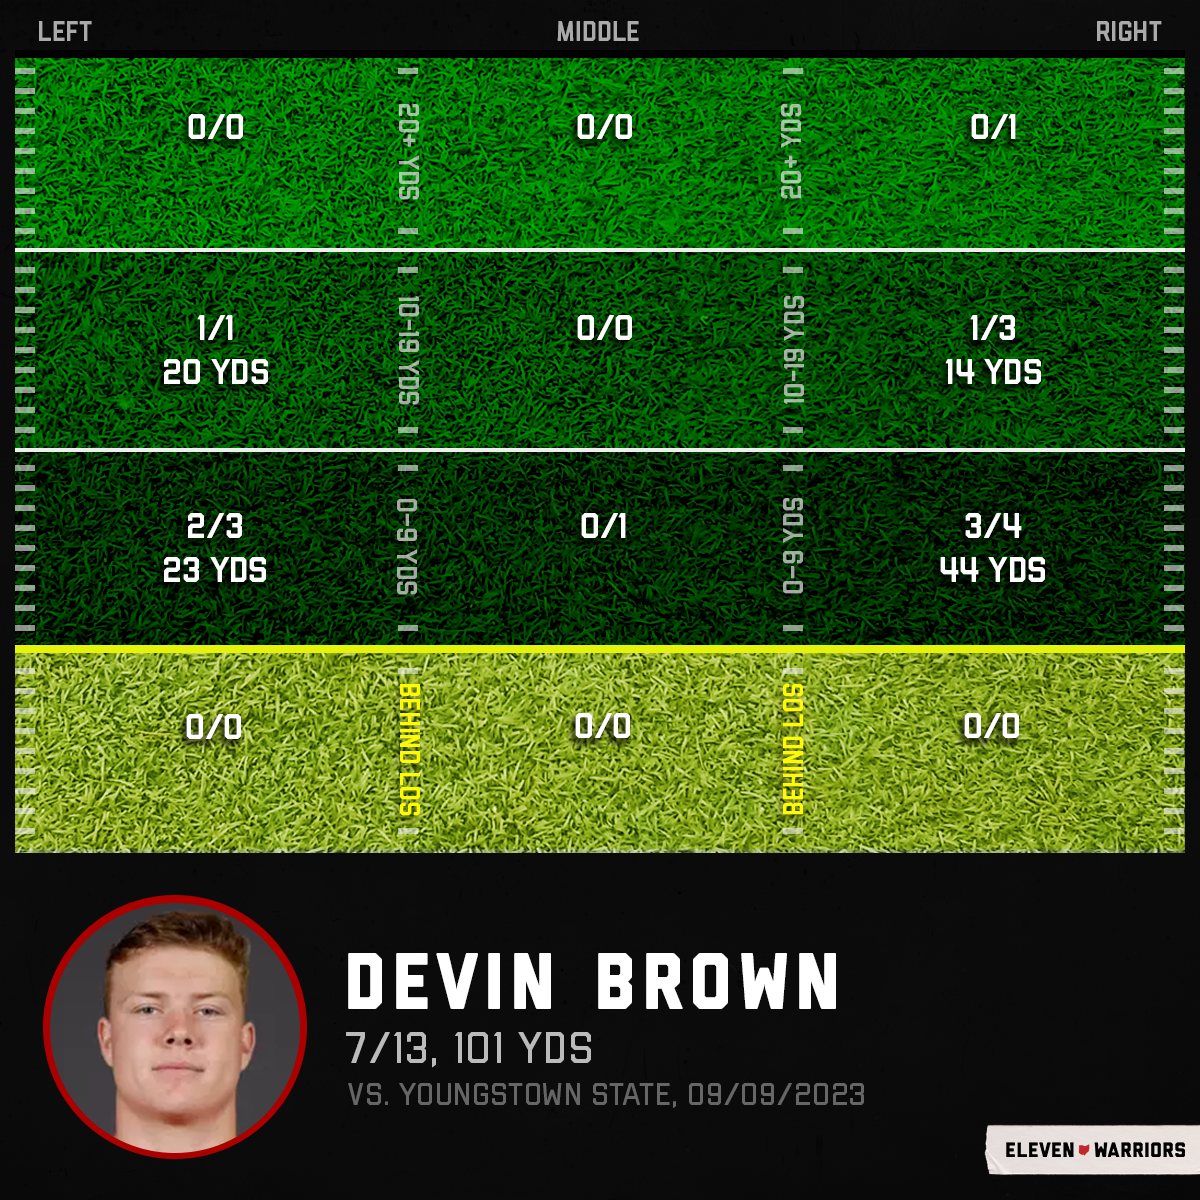 Devin Brown vs. Youngstown State